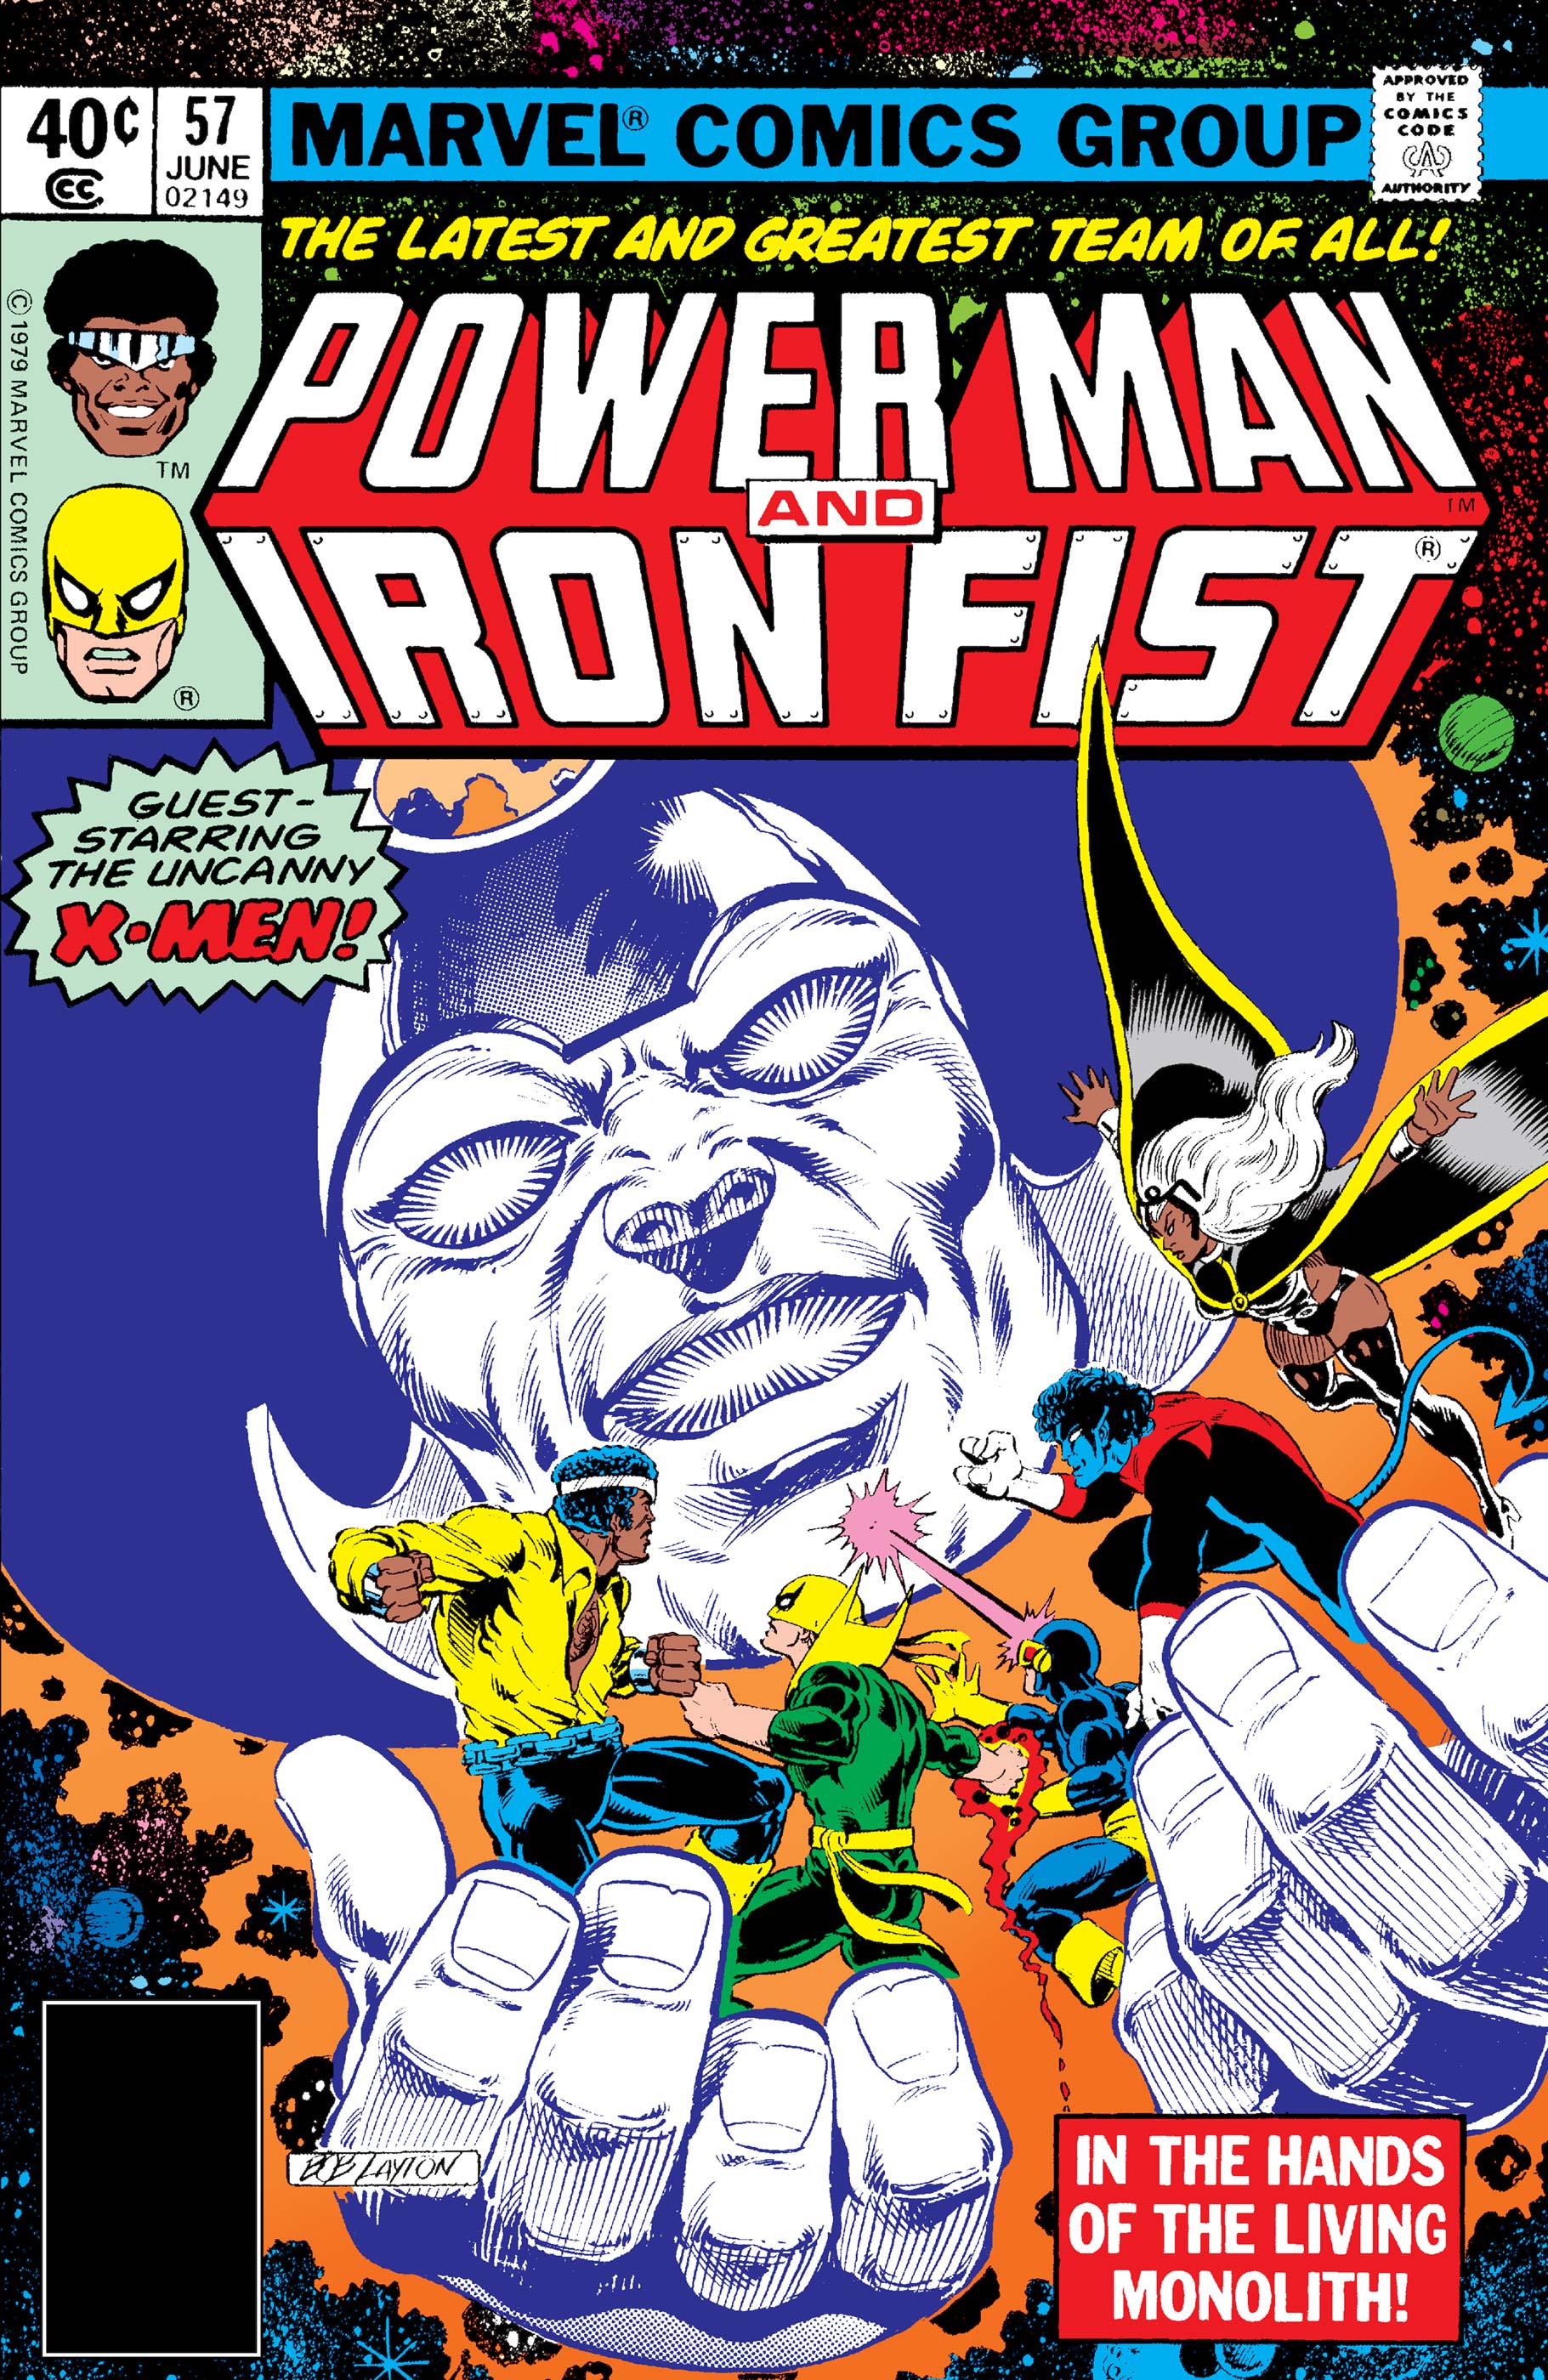 Power Man and Iron Fist (1978) #57